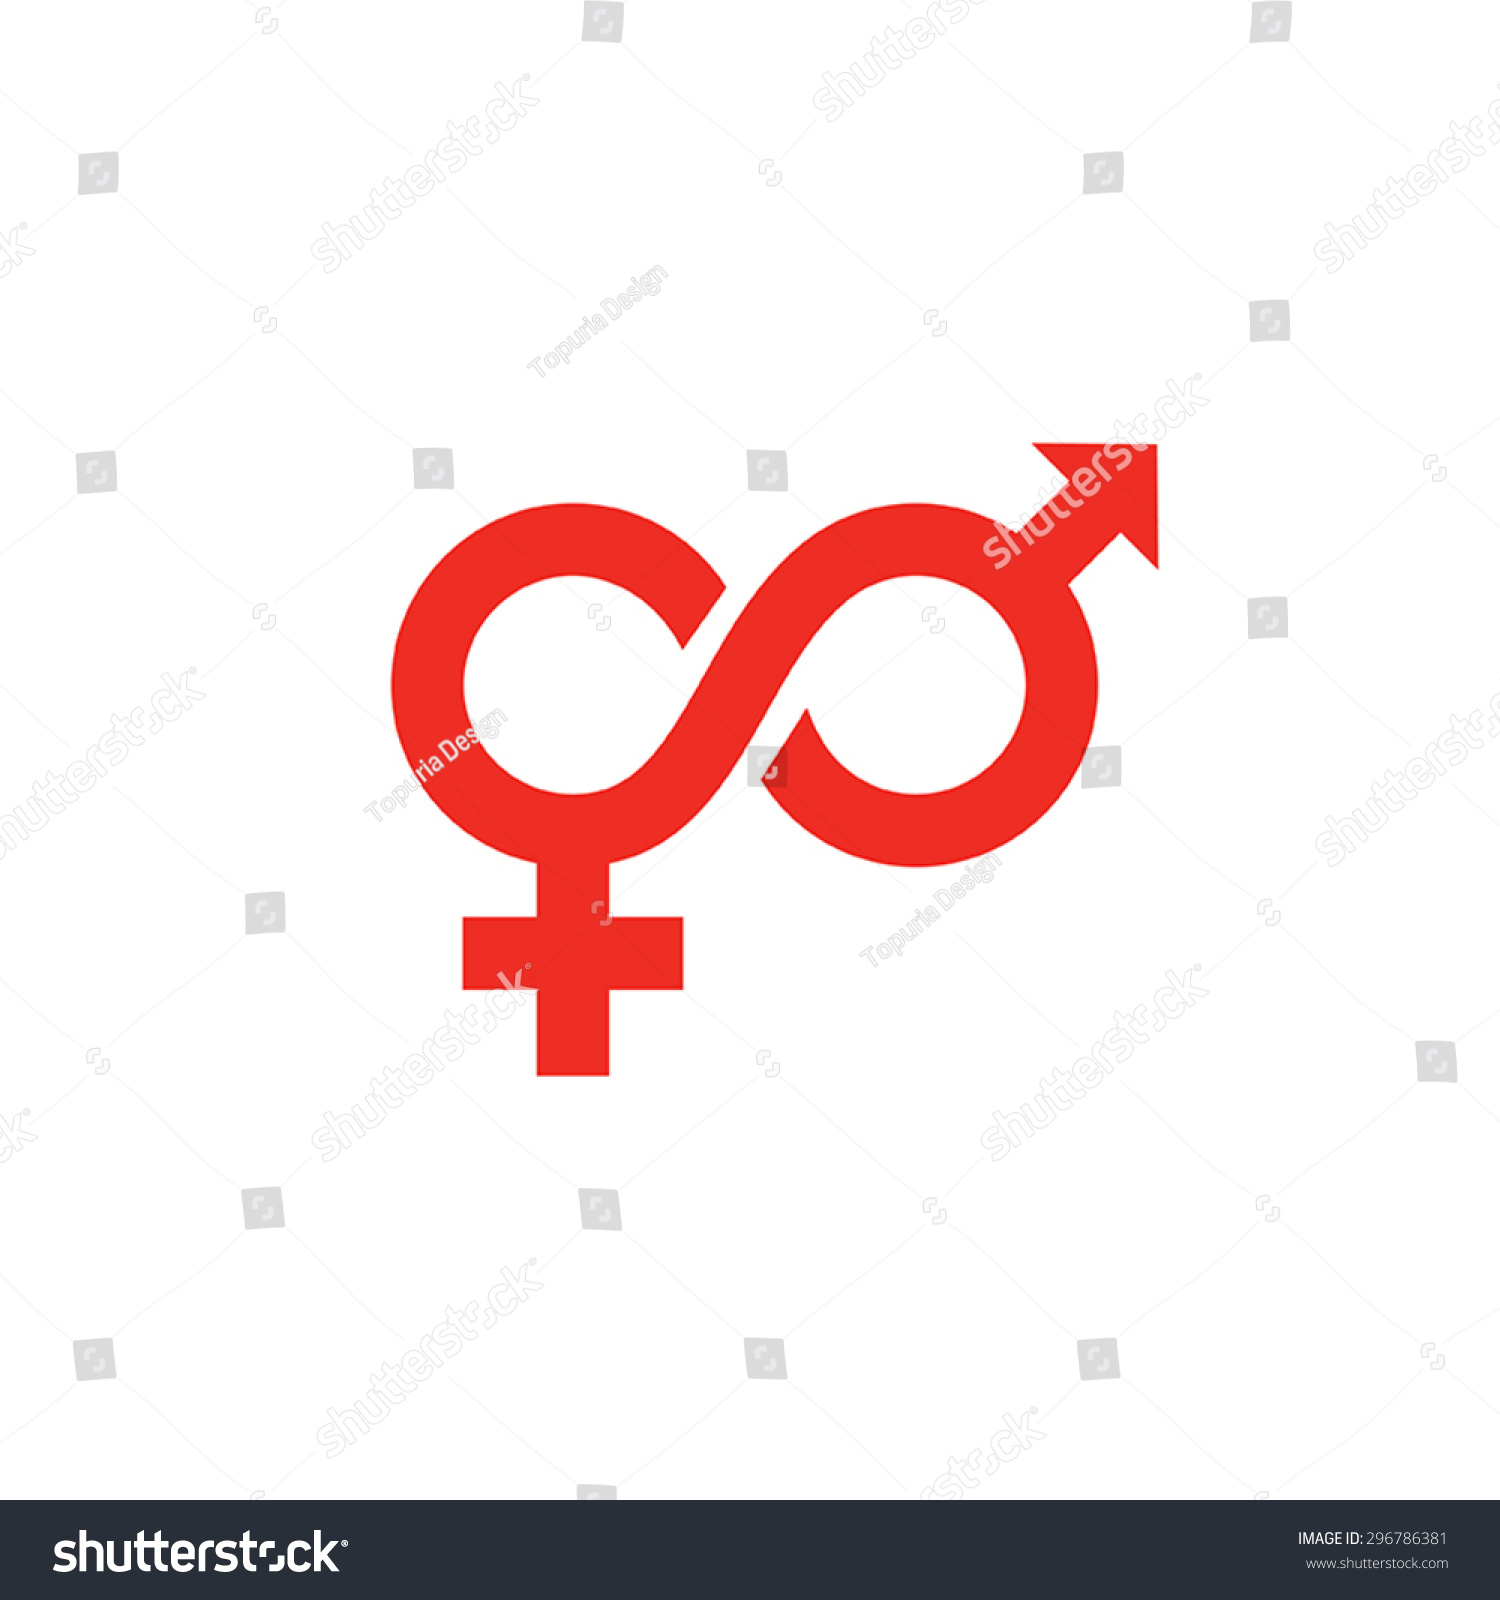 Dating Logo Male Female Sex Signs Stock Vector 296786381